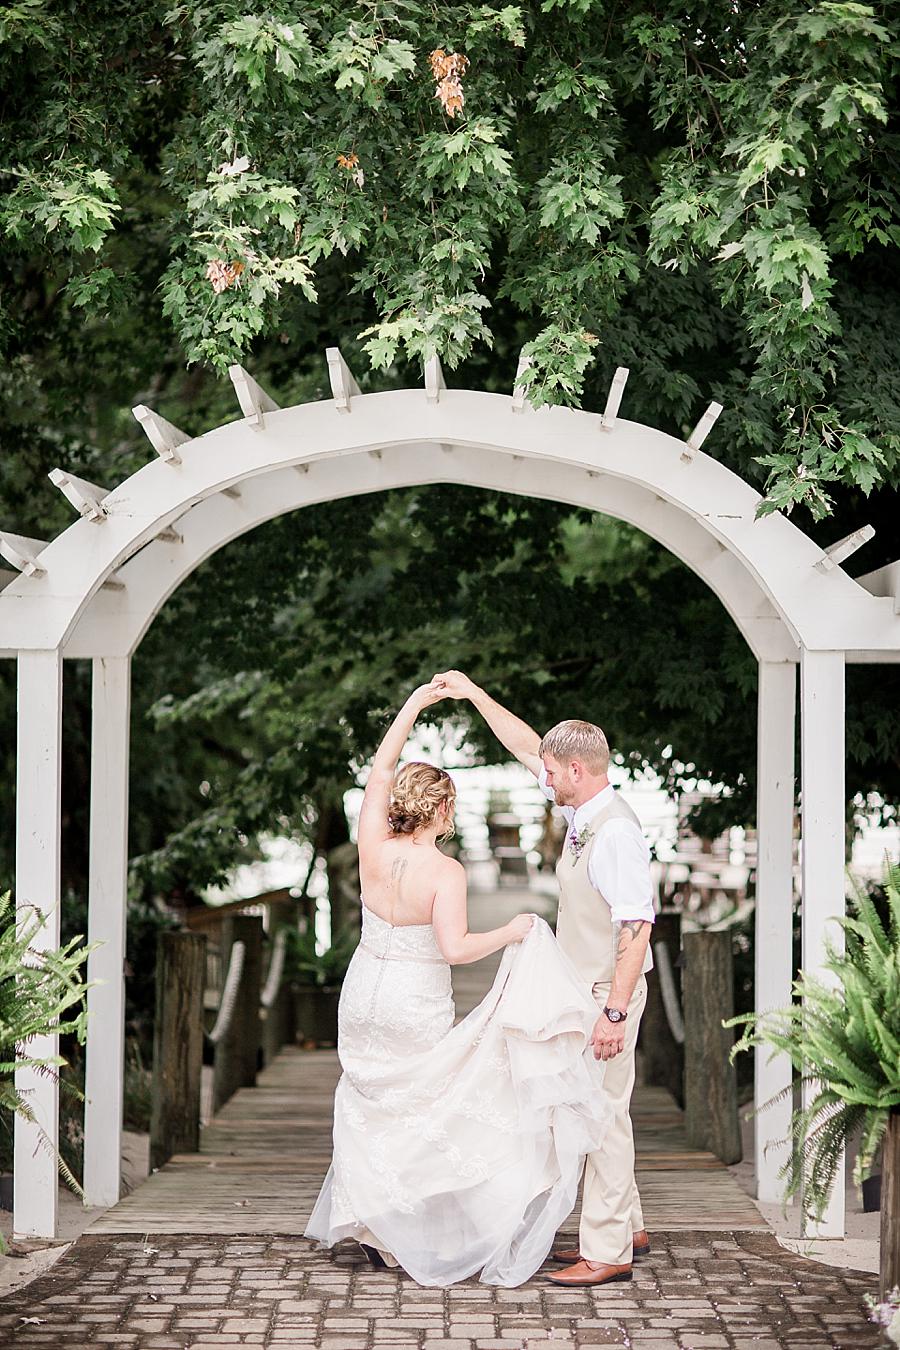 Bridal twirl at this Hunter Valley Pavilion Wedding by Knoxville Wedding Photographer, Amanda May Photos.